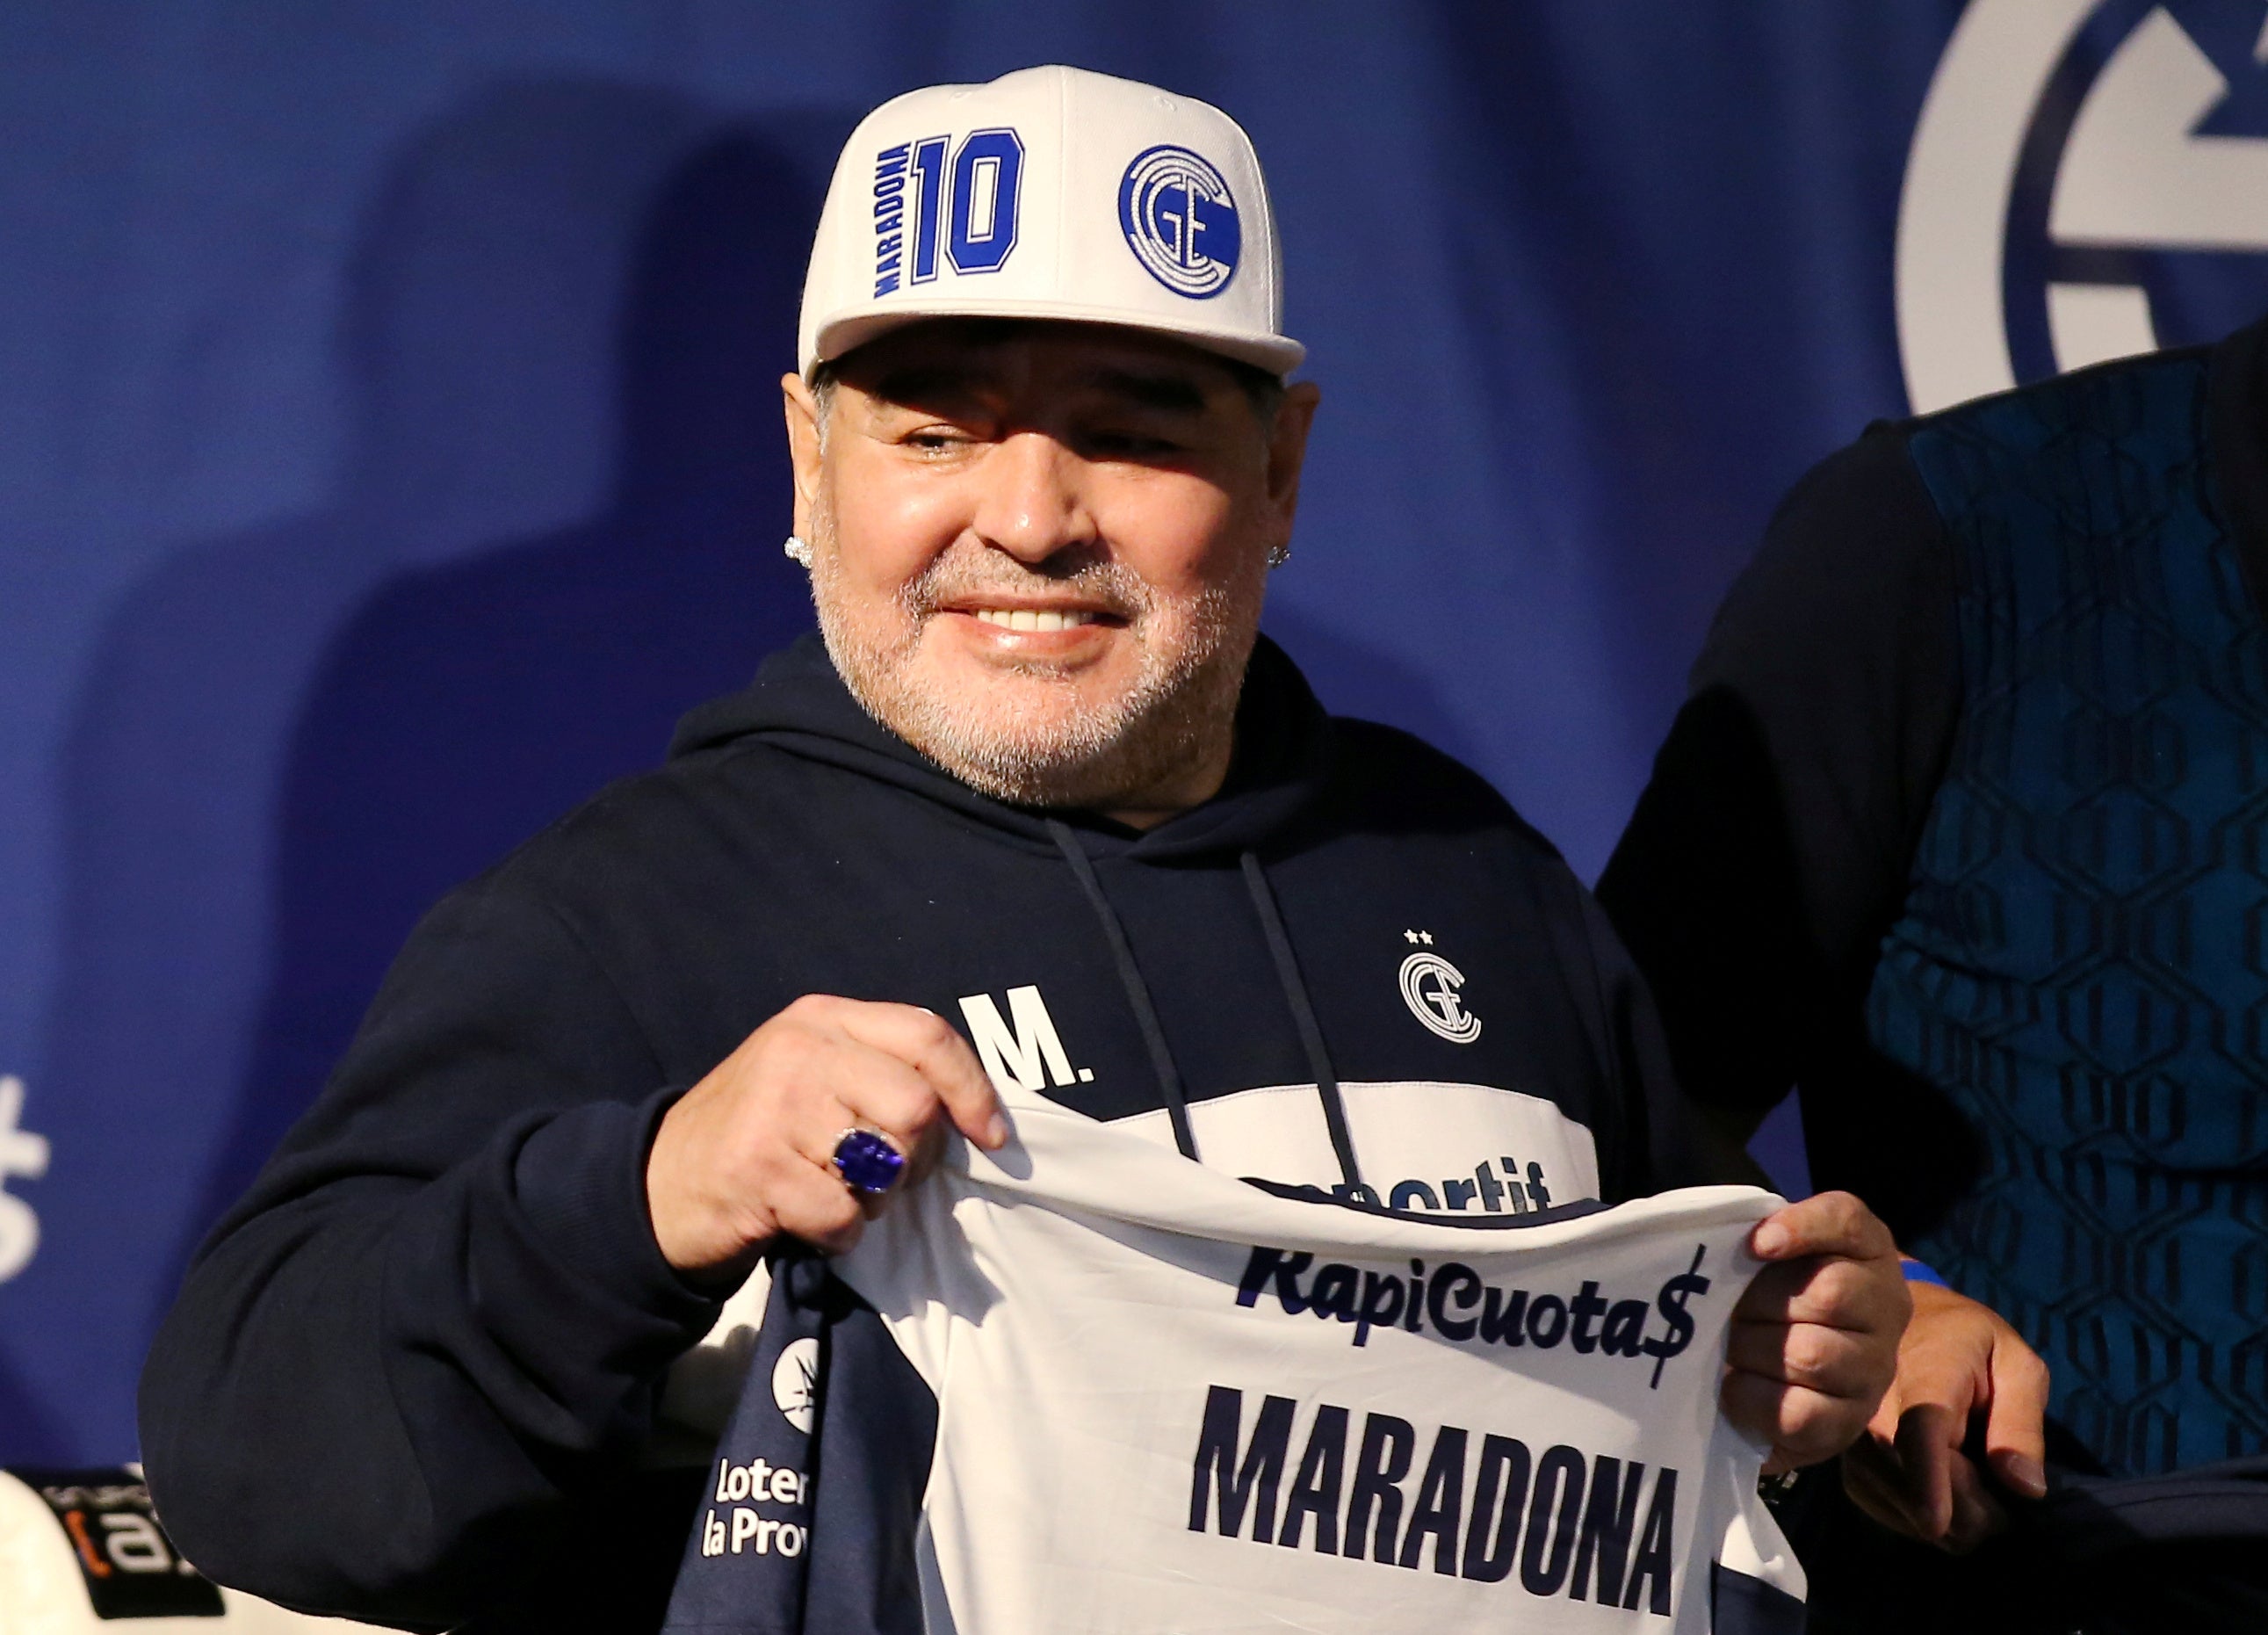 Diego Maradona has been suffering from ‘confusion’ caused by abstinence while in hospital